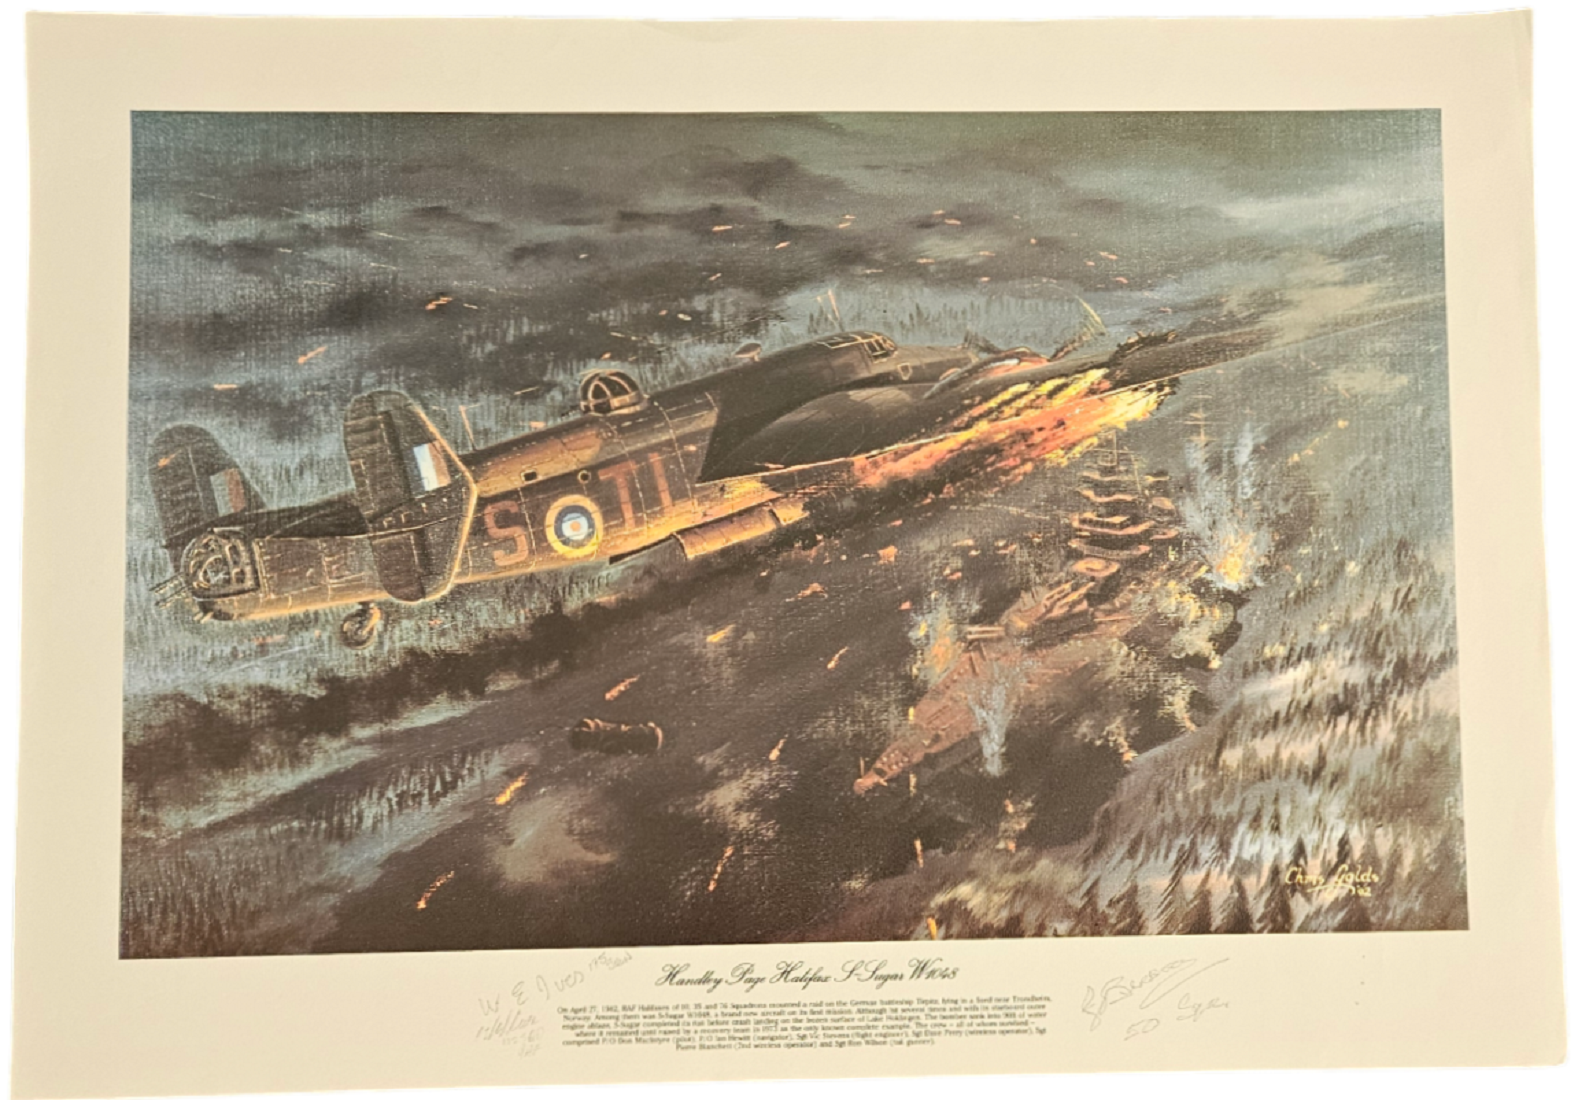 Multi Signed Chris Golds Colour Print Titled Handley Page Halifax S-Sugar W1048. Signed in Pencil by